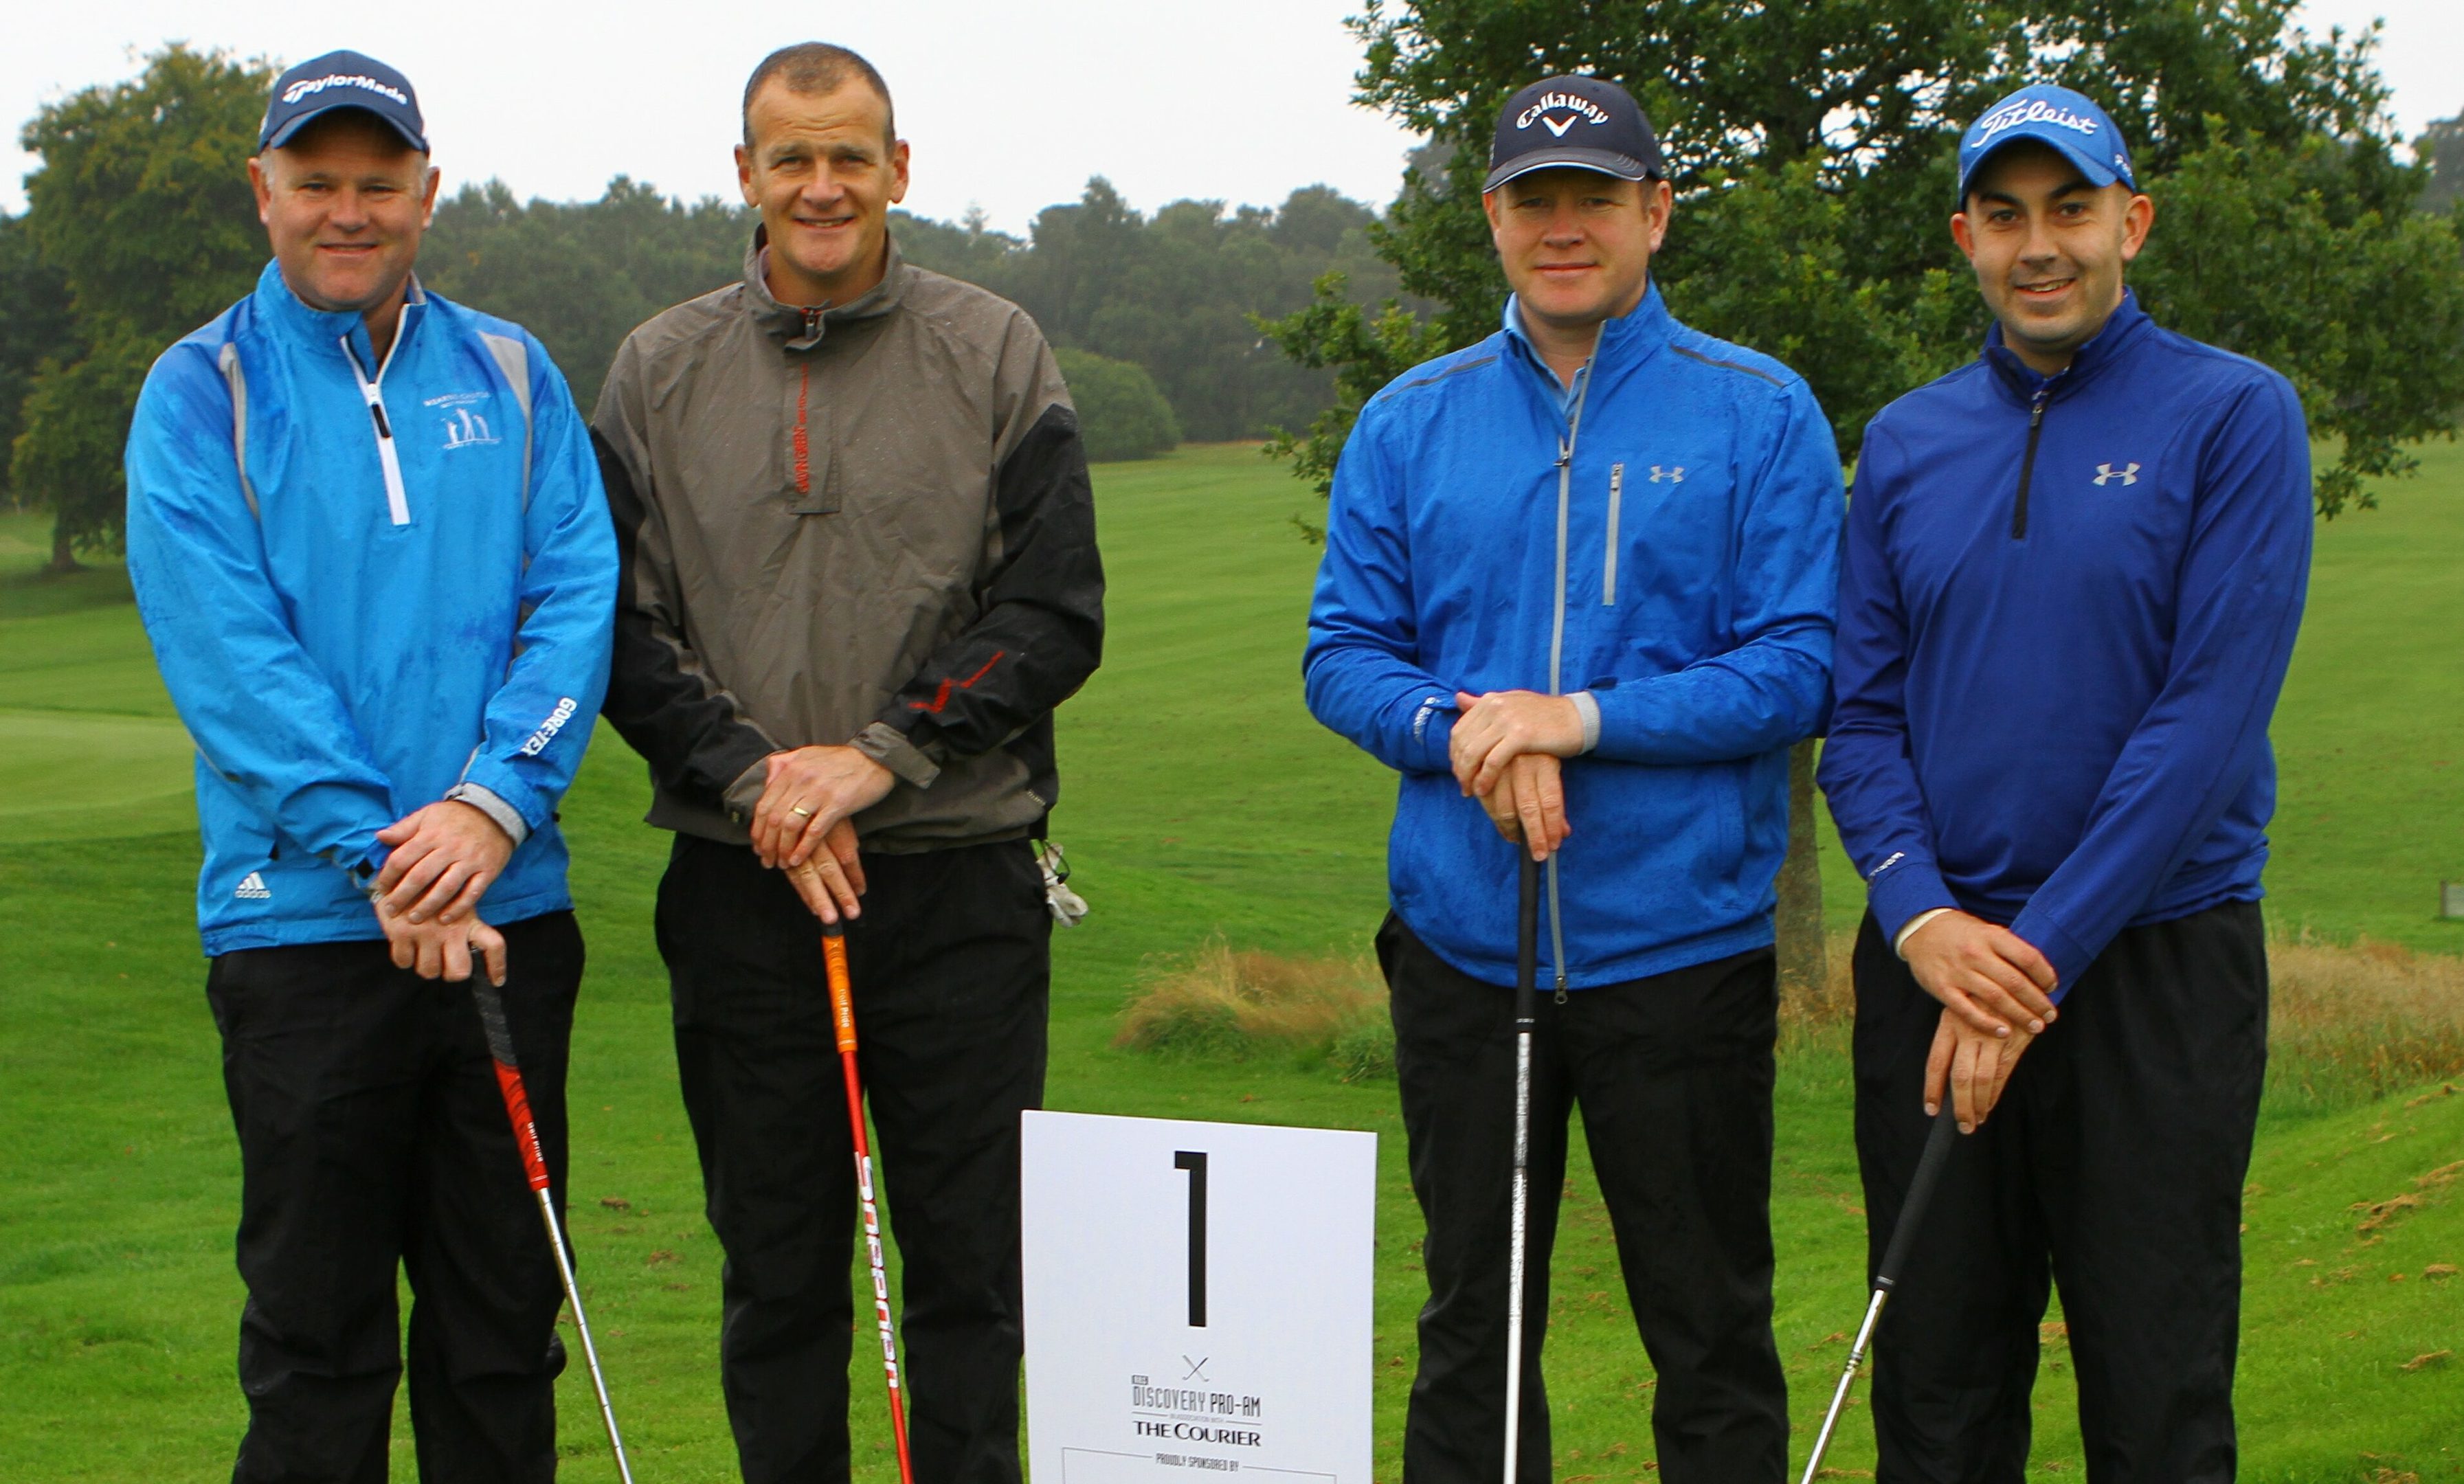 Alastair Forsyth, Ross Graham, Stuart Graham and Nick Barr before teeing off at the RRS Discovery Pro-am Golf Tournament at Downfield Golf Club.